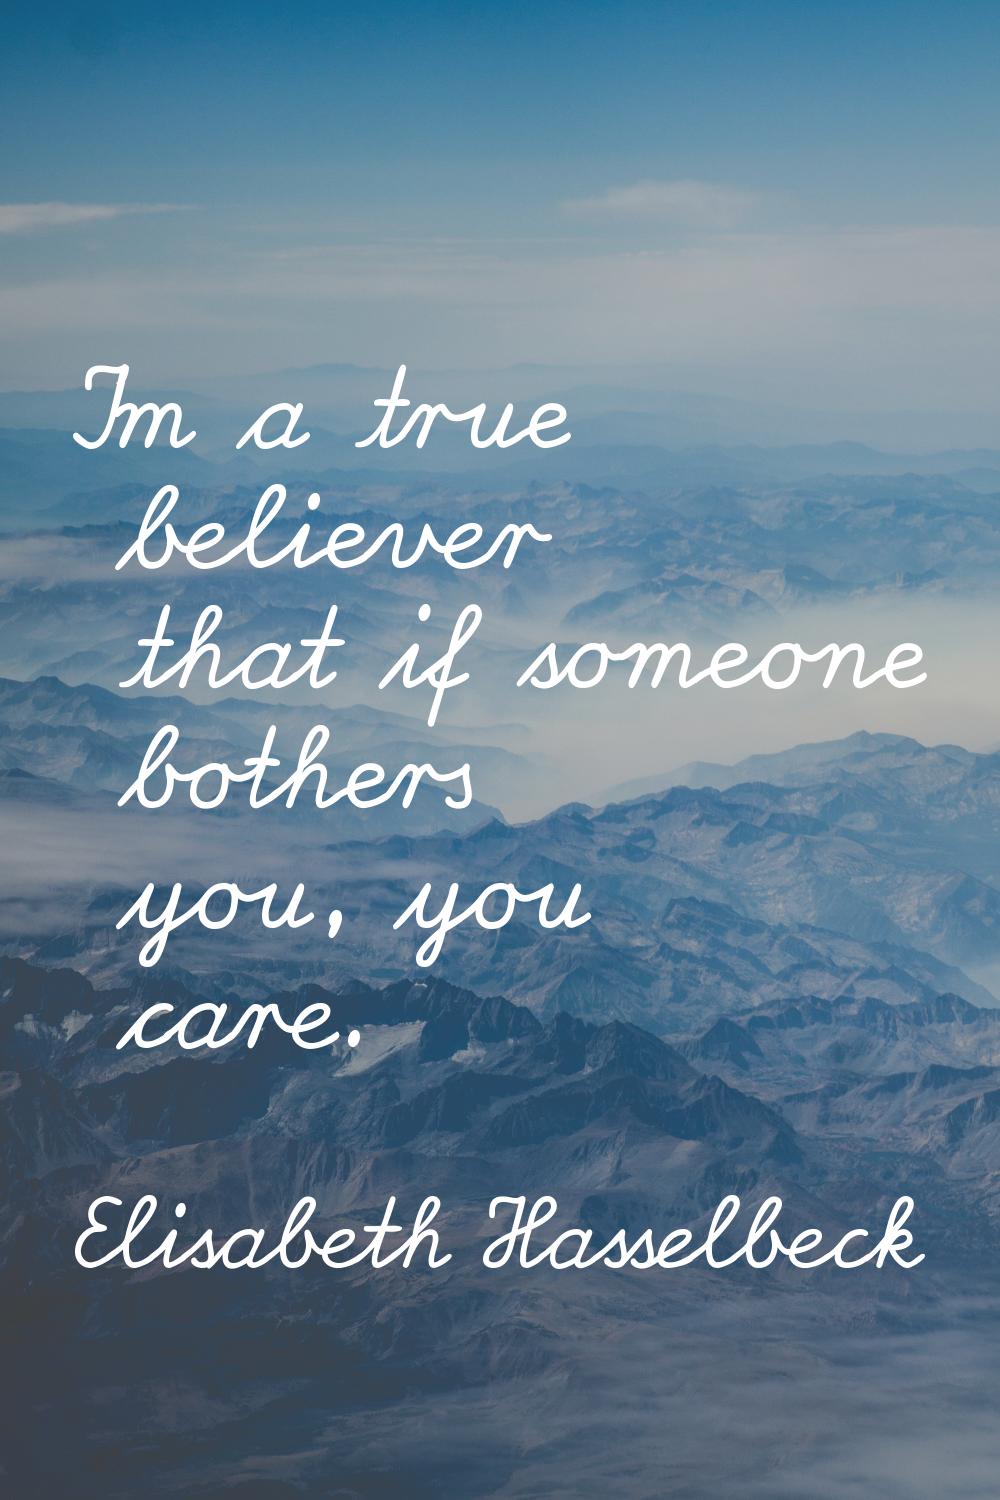 I'm a true believer that if someone bothers you, you care.